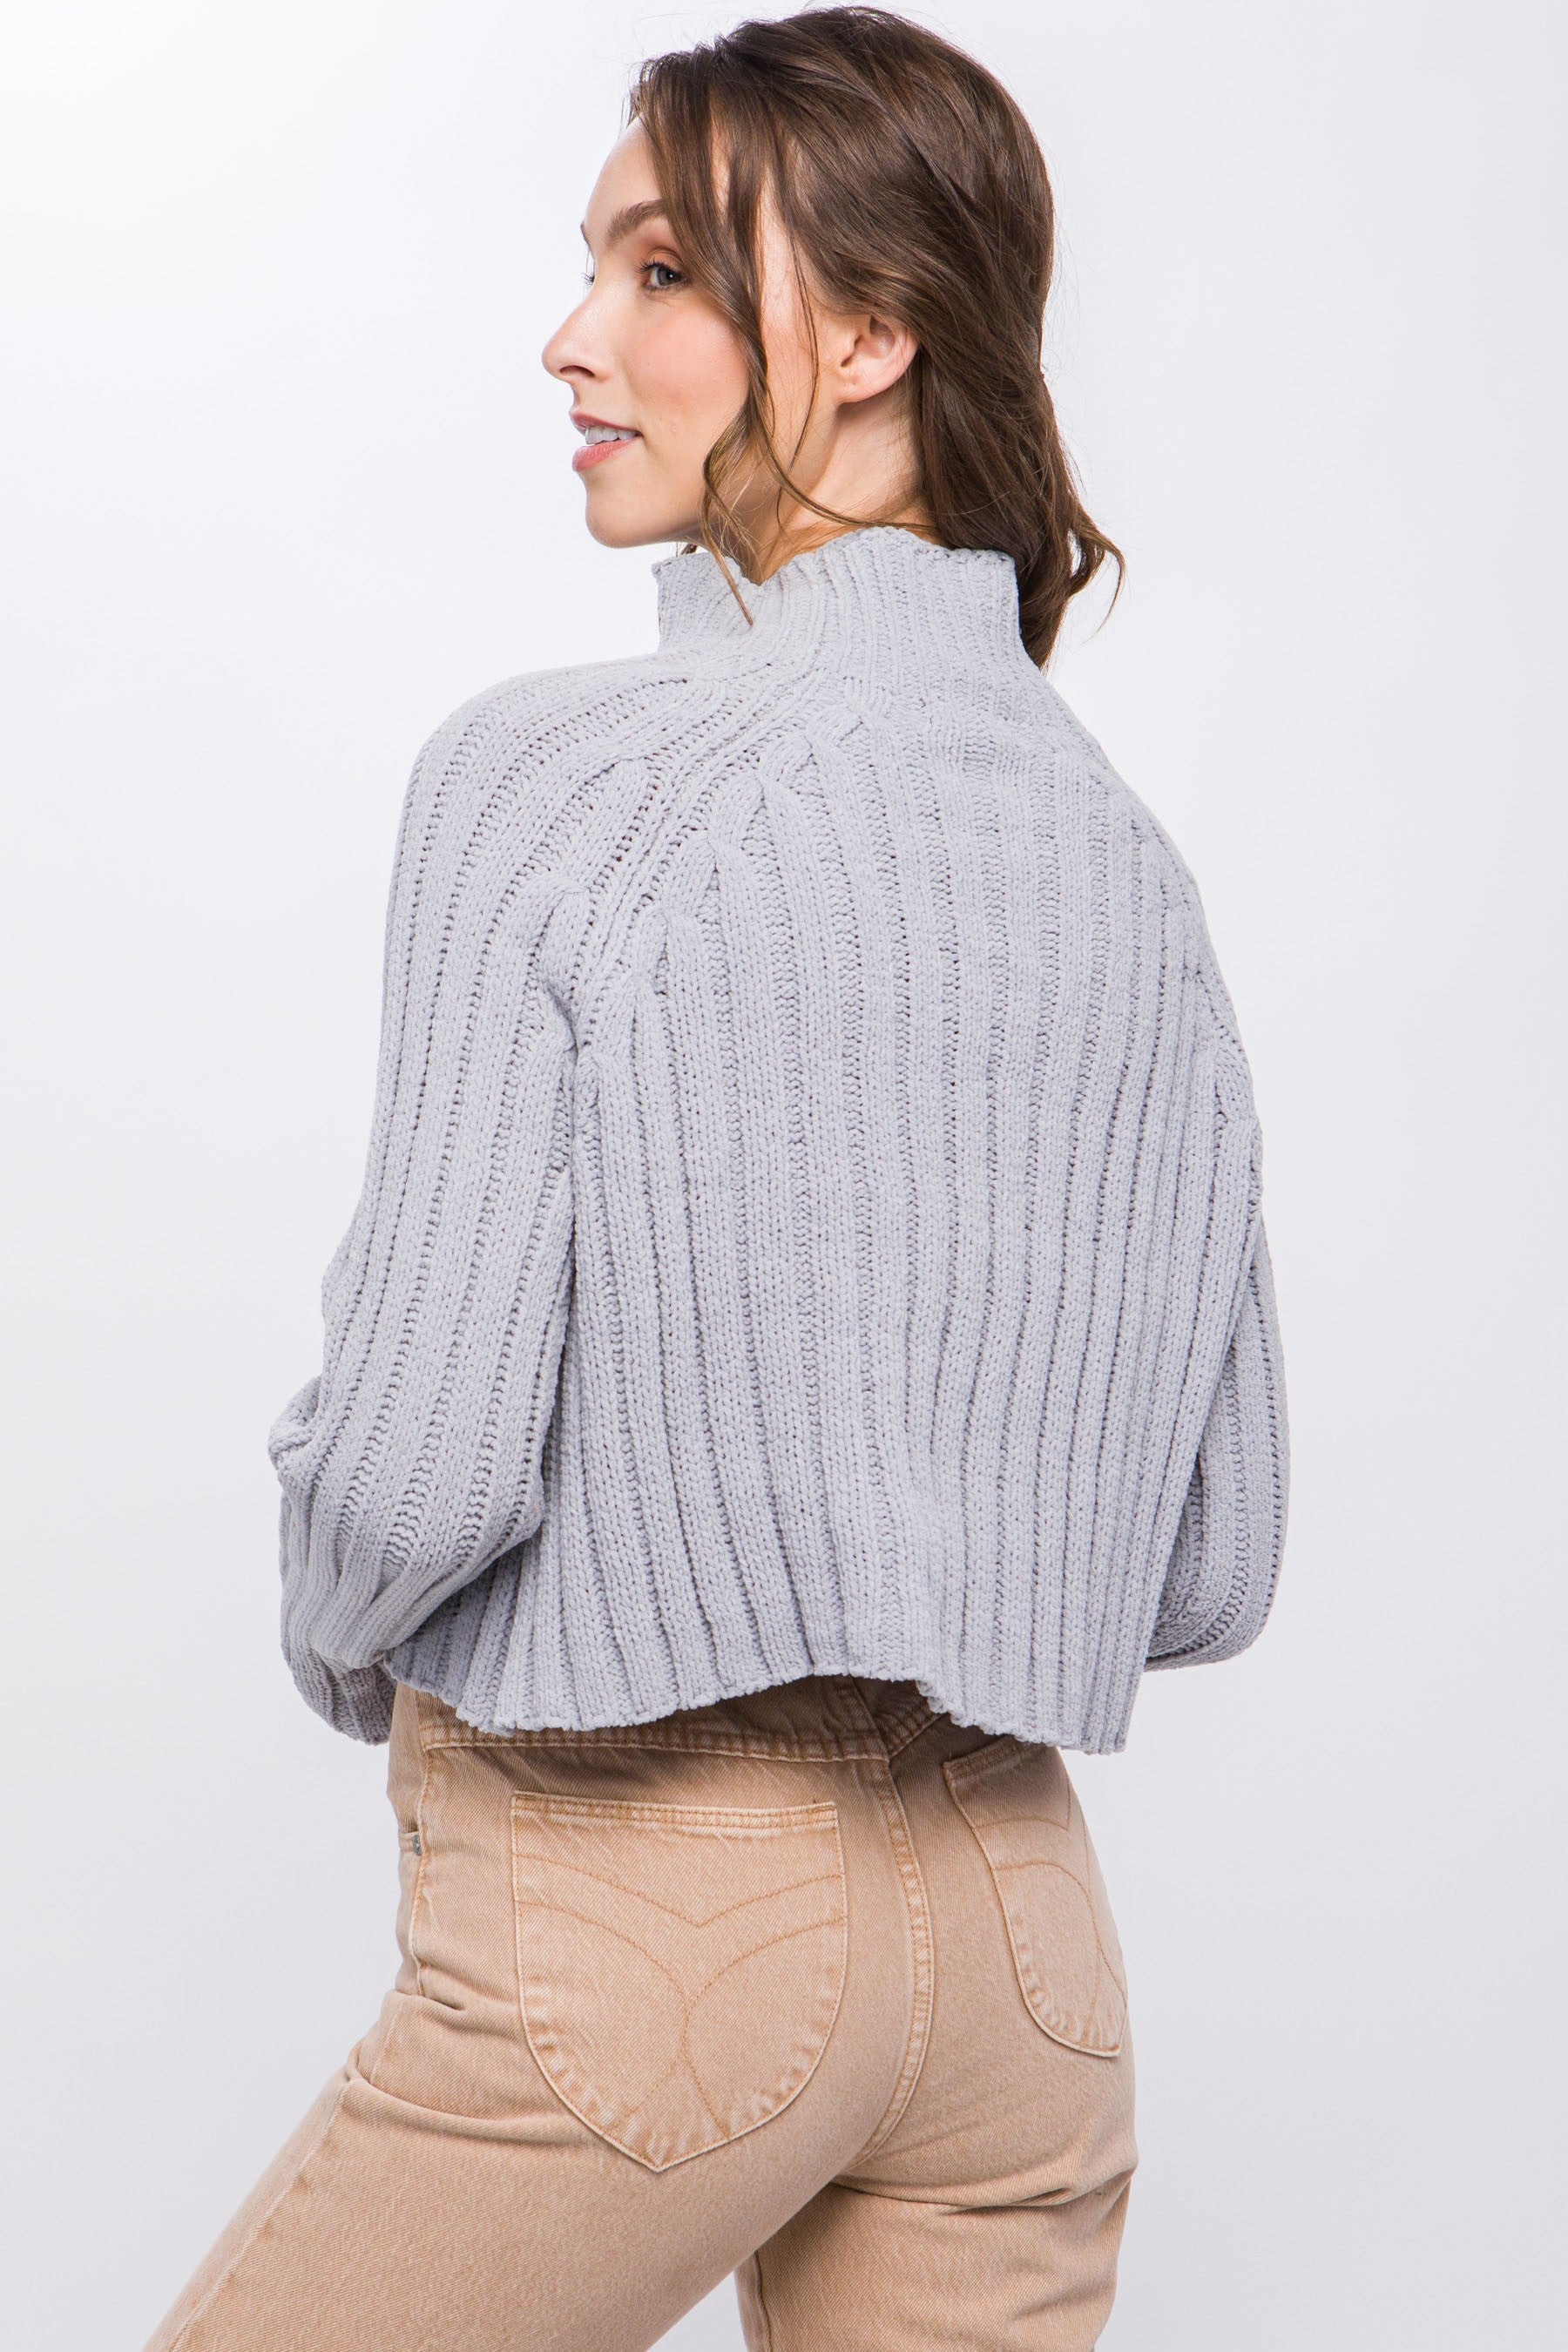 The Fiona Pull Over Sweater